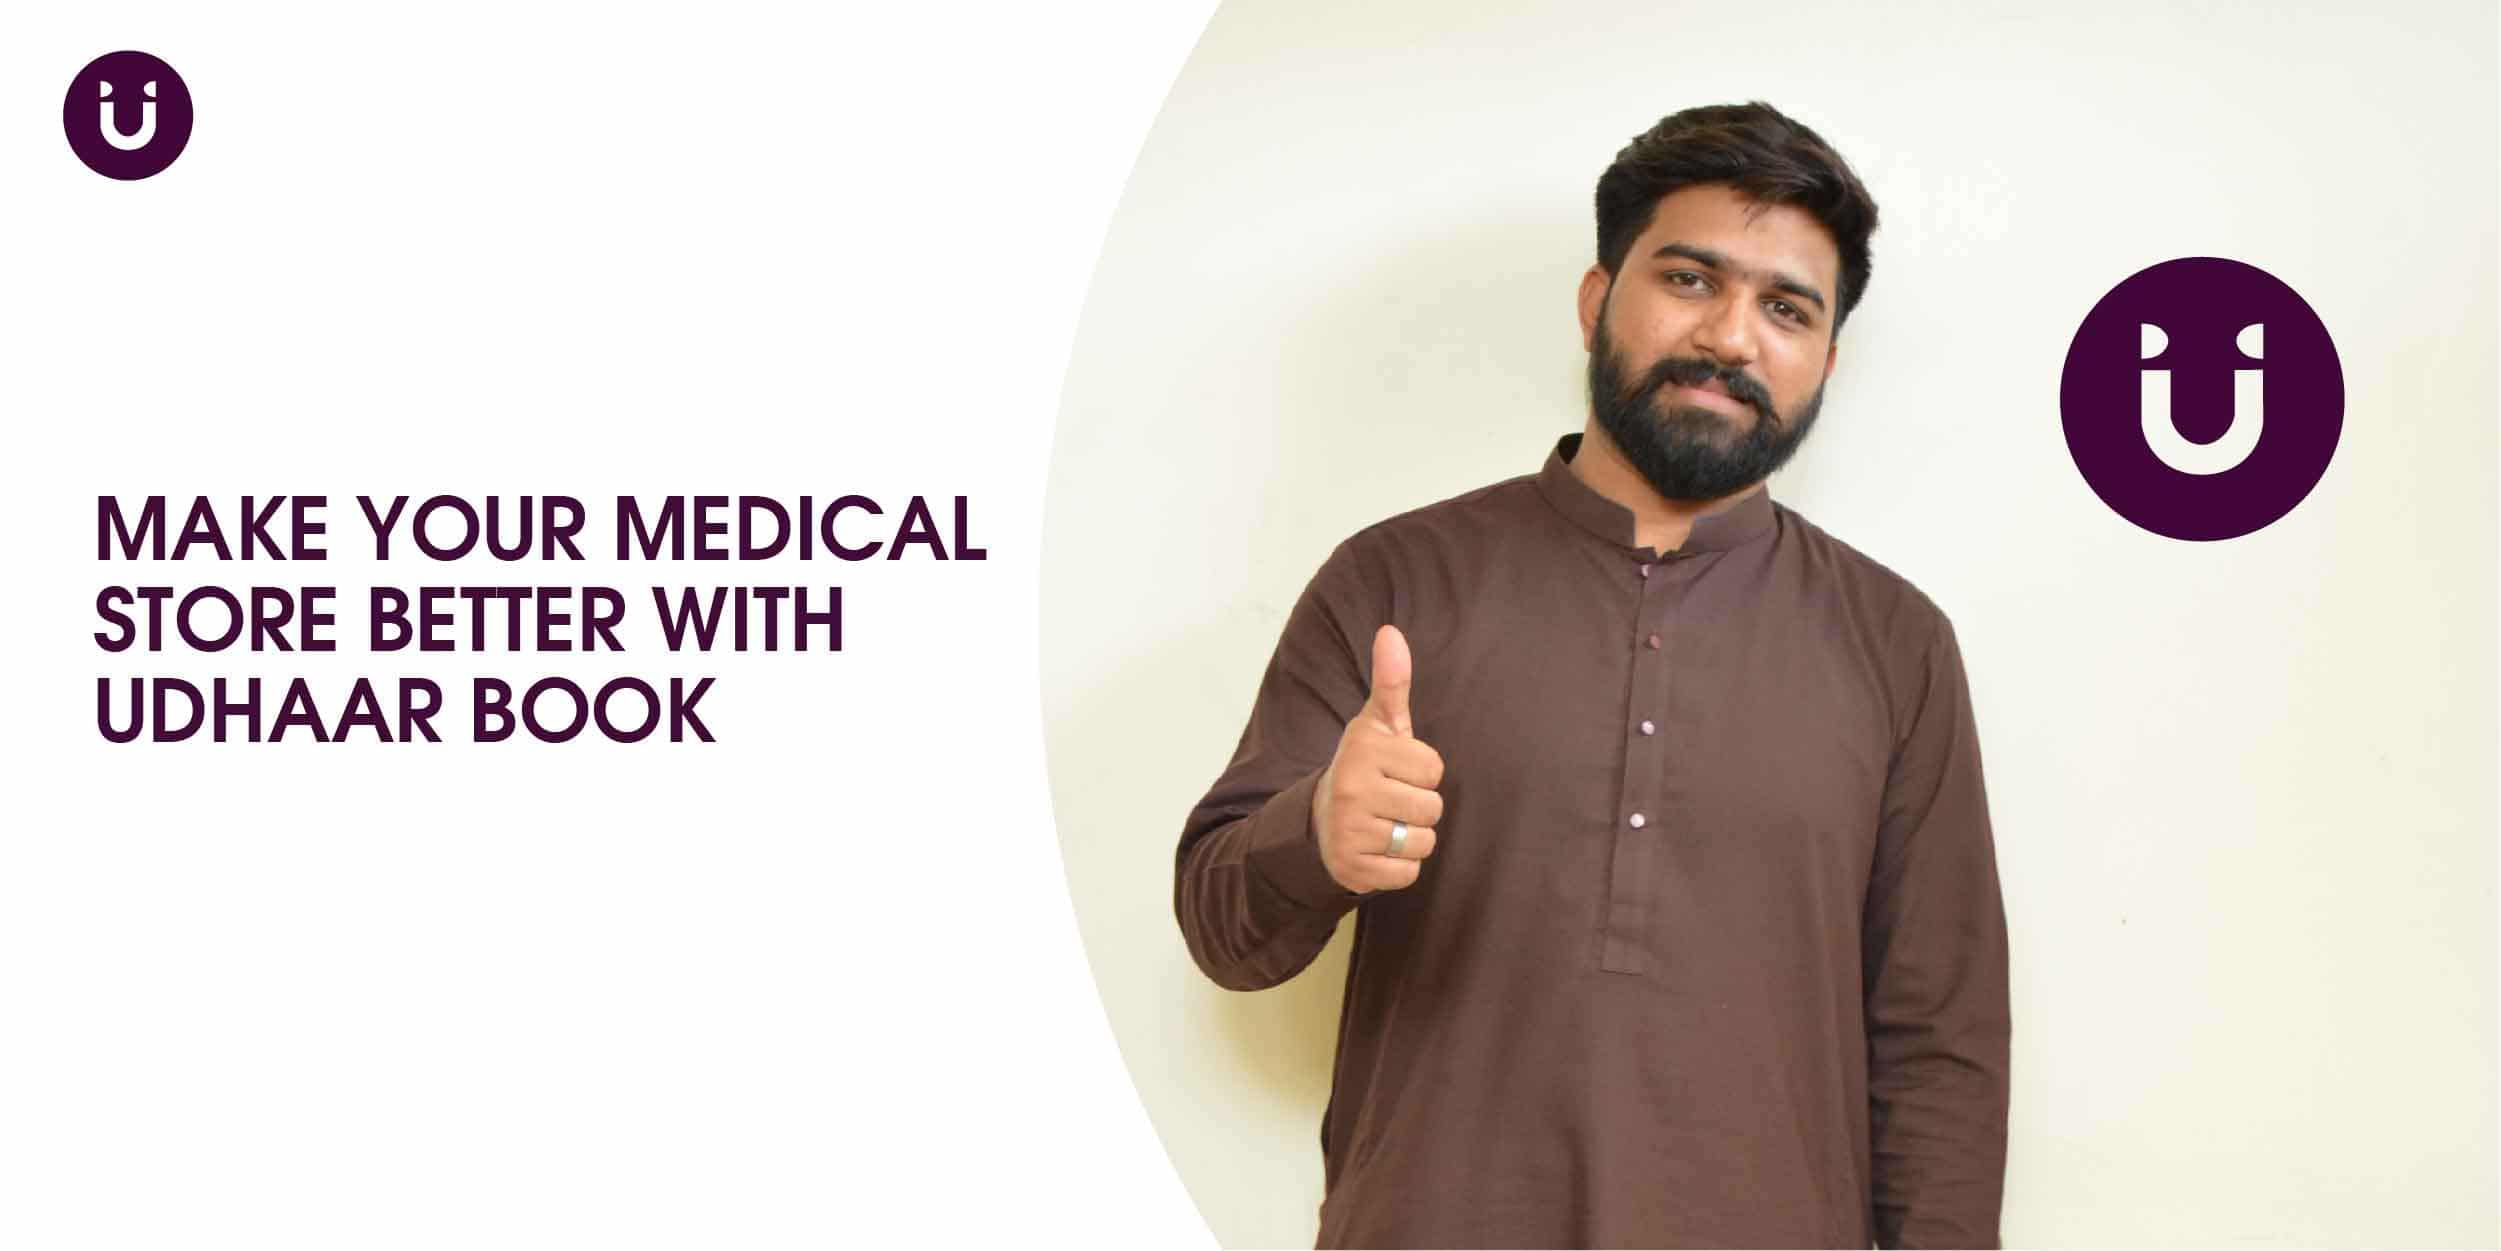 Make Your Medical Store Better with Udhaar Book